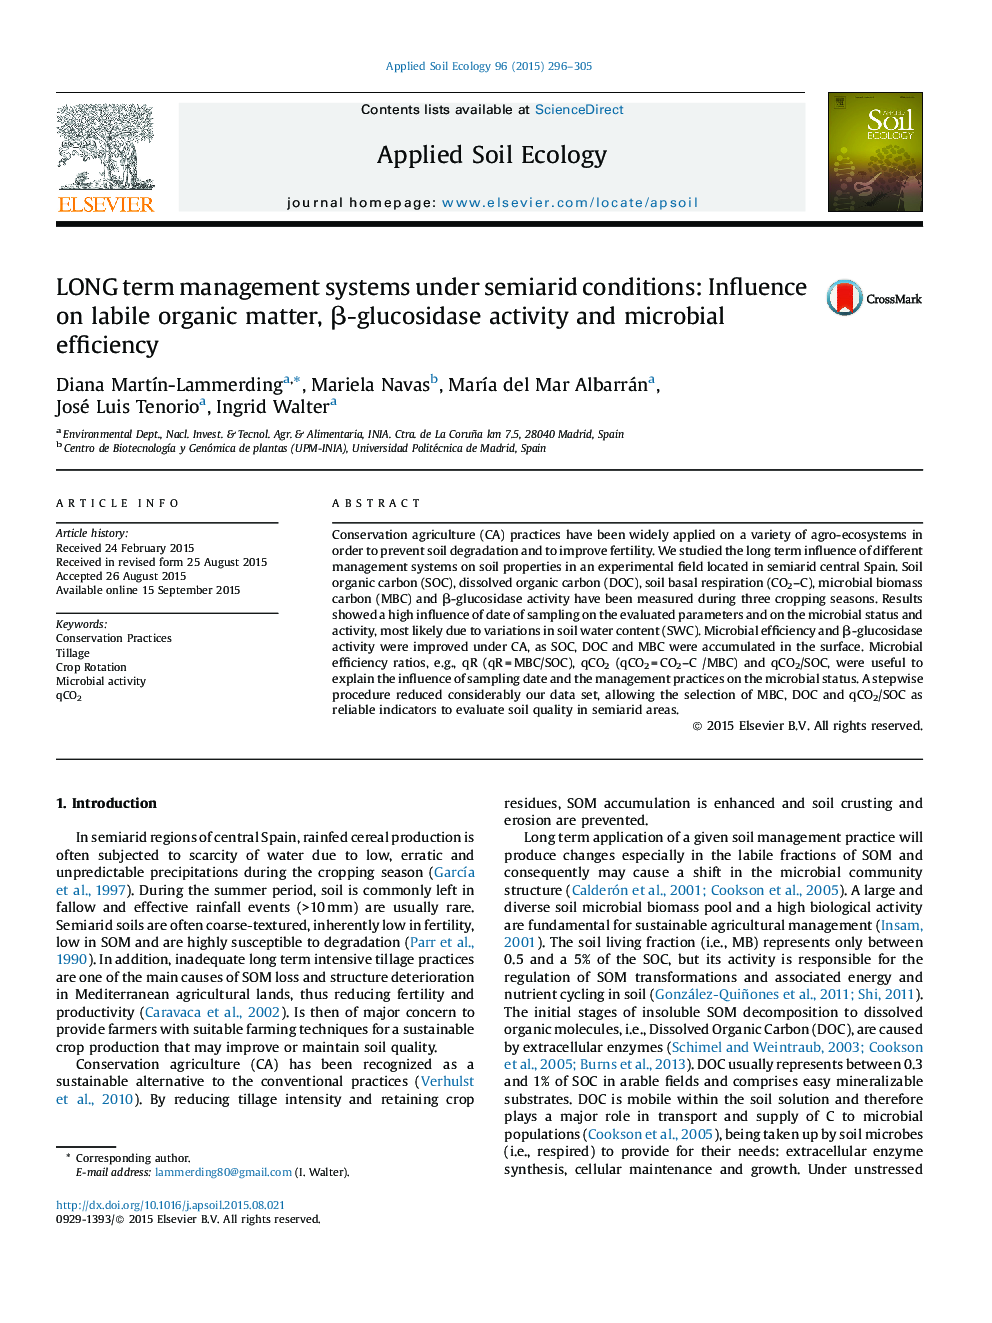 LONG term management systems under semiarid conditions: Influence on labile organic matter, β-glucosidase activity and microbial efficiency